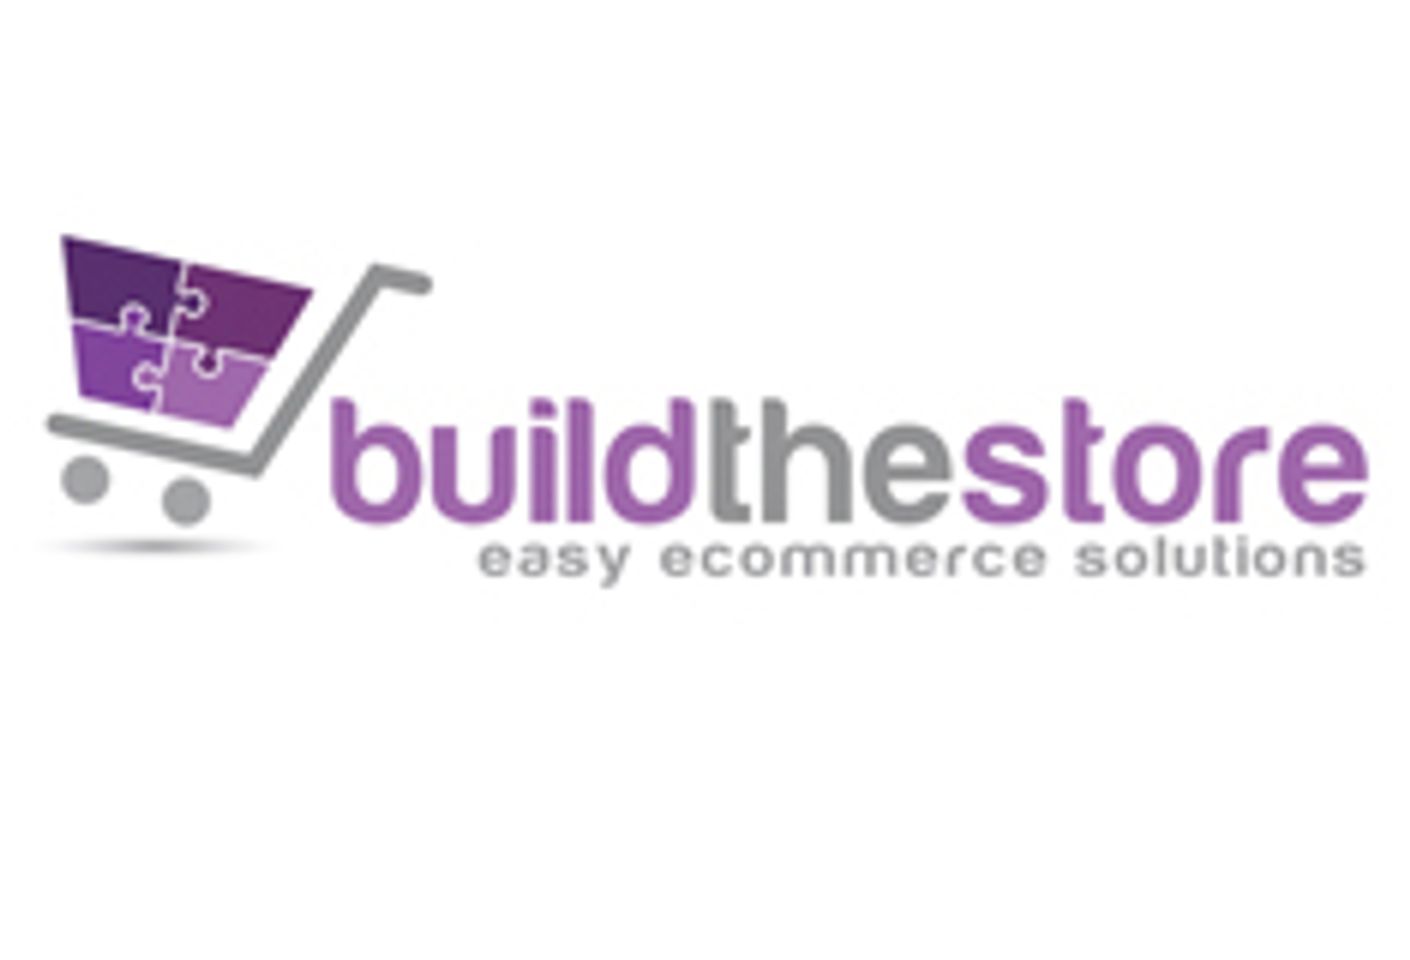 Build the Store to Showcase New Features at ILS